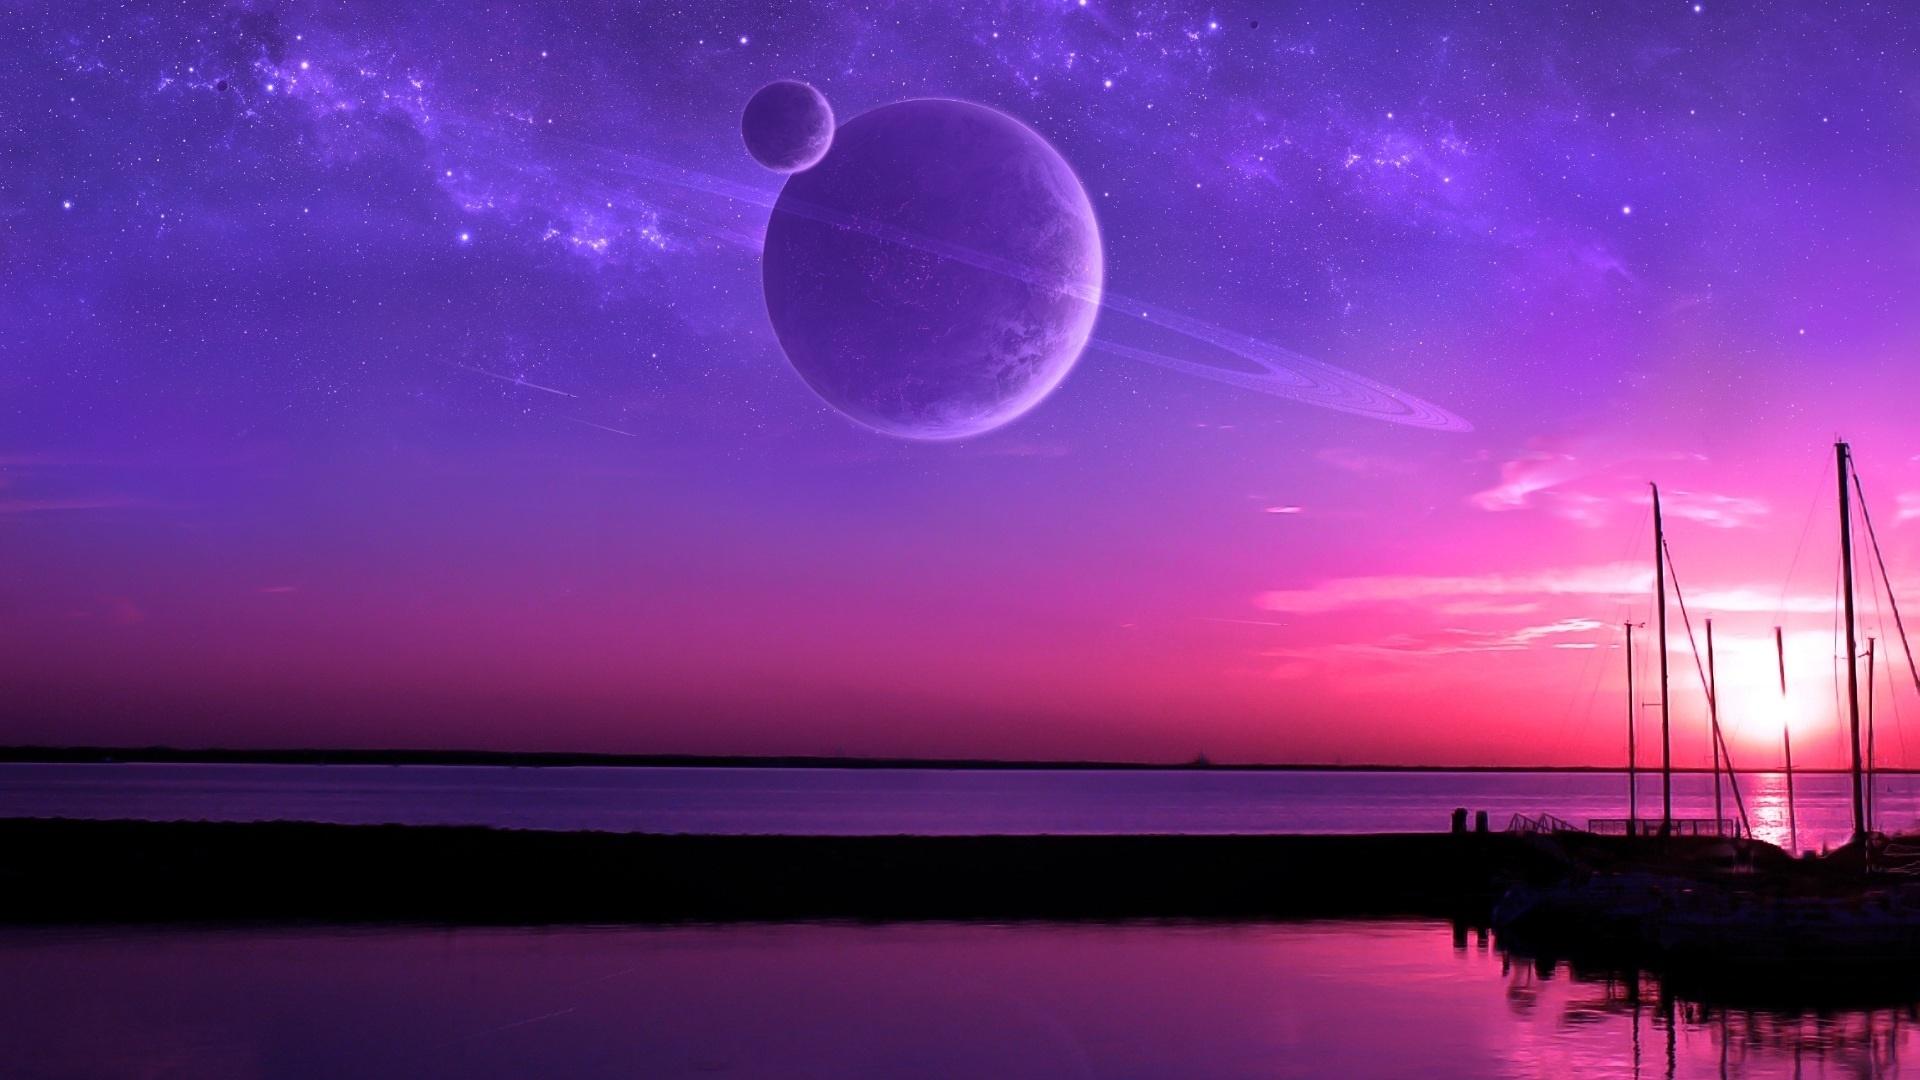 Purple Space And Water Fantasy Art HD Wallpaper